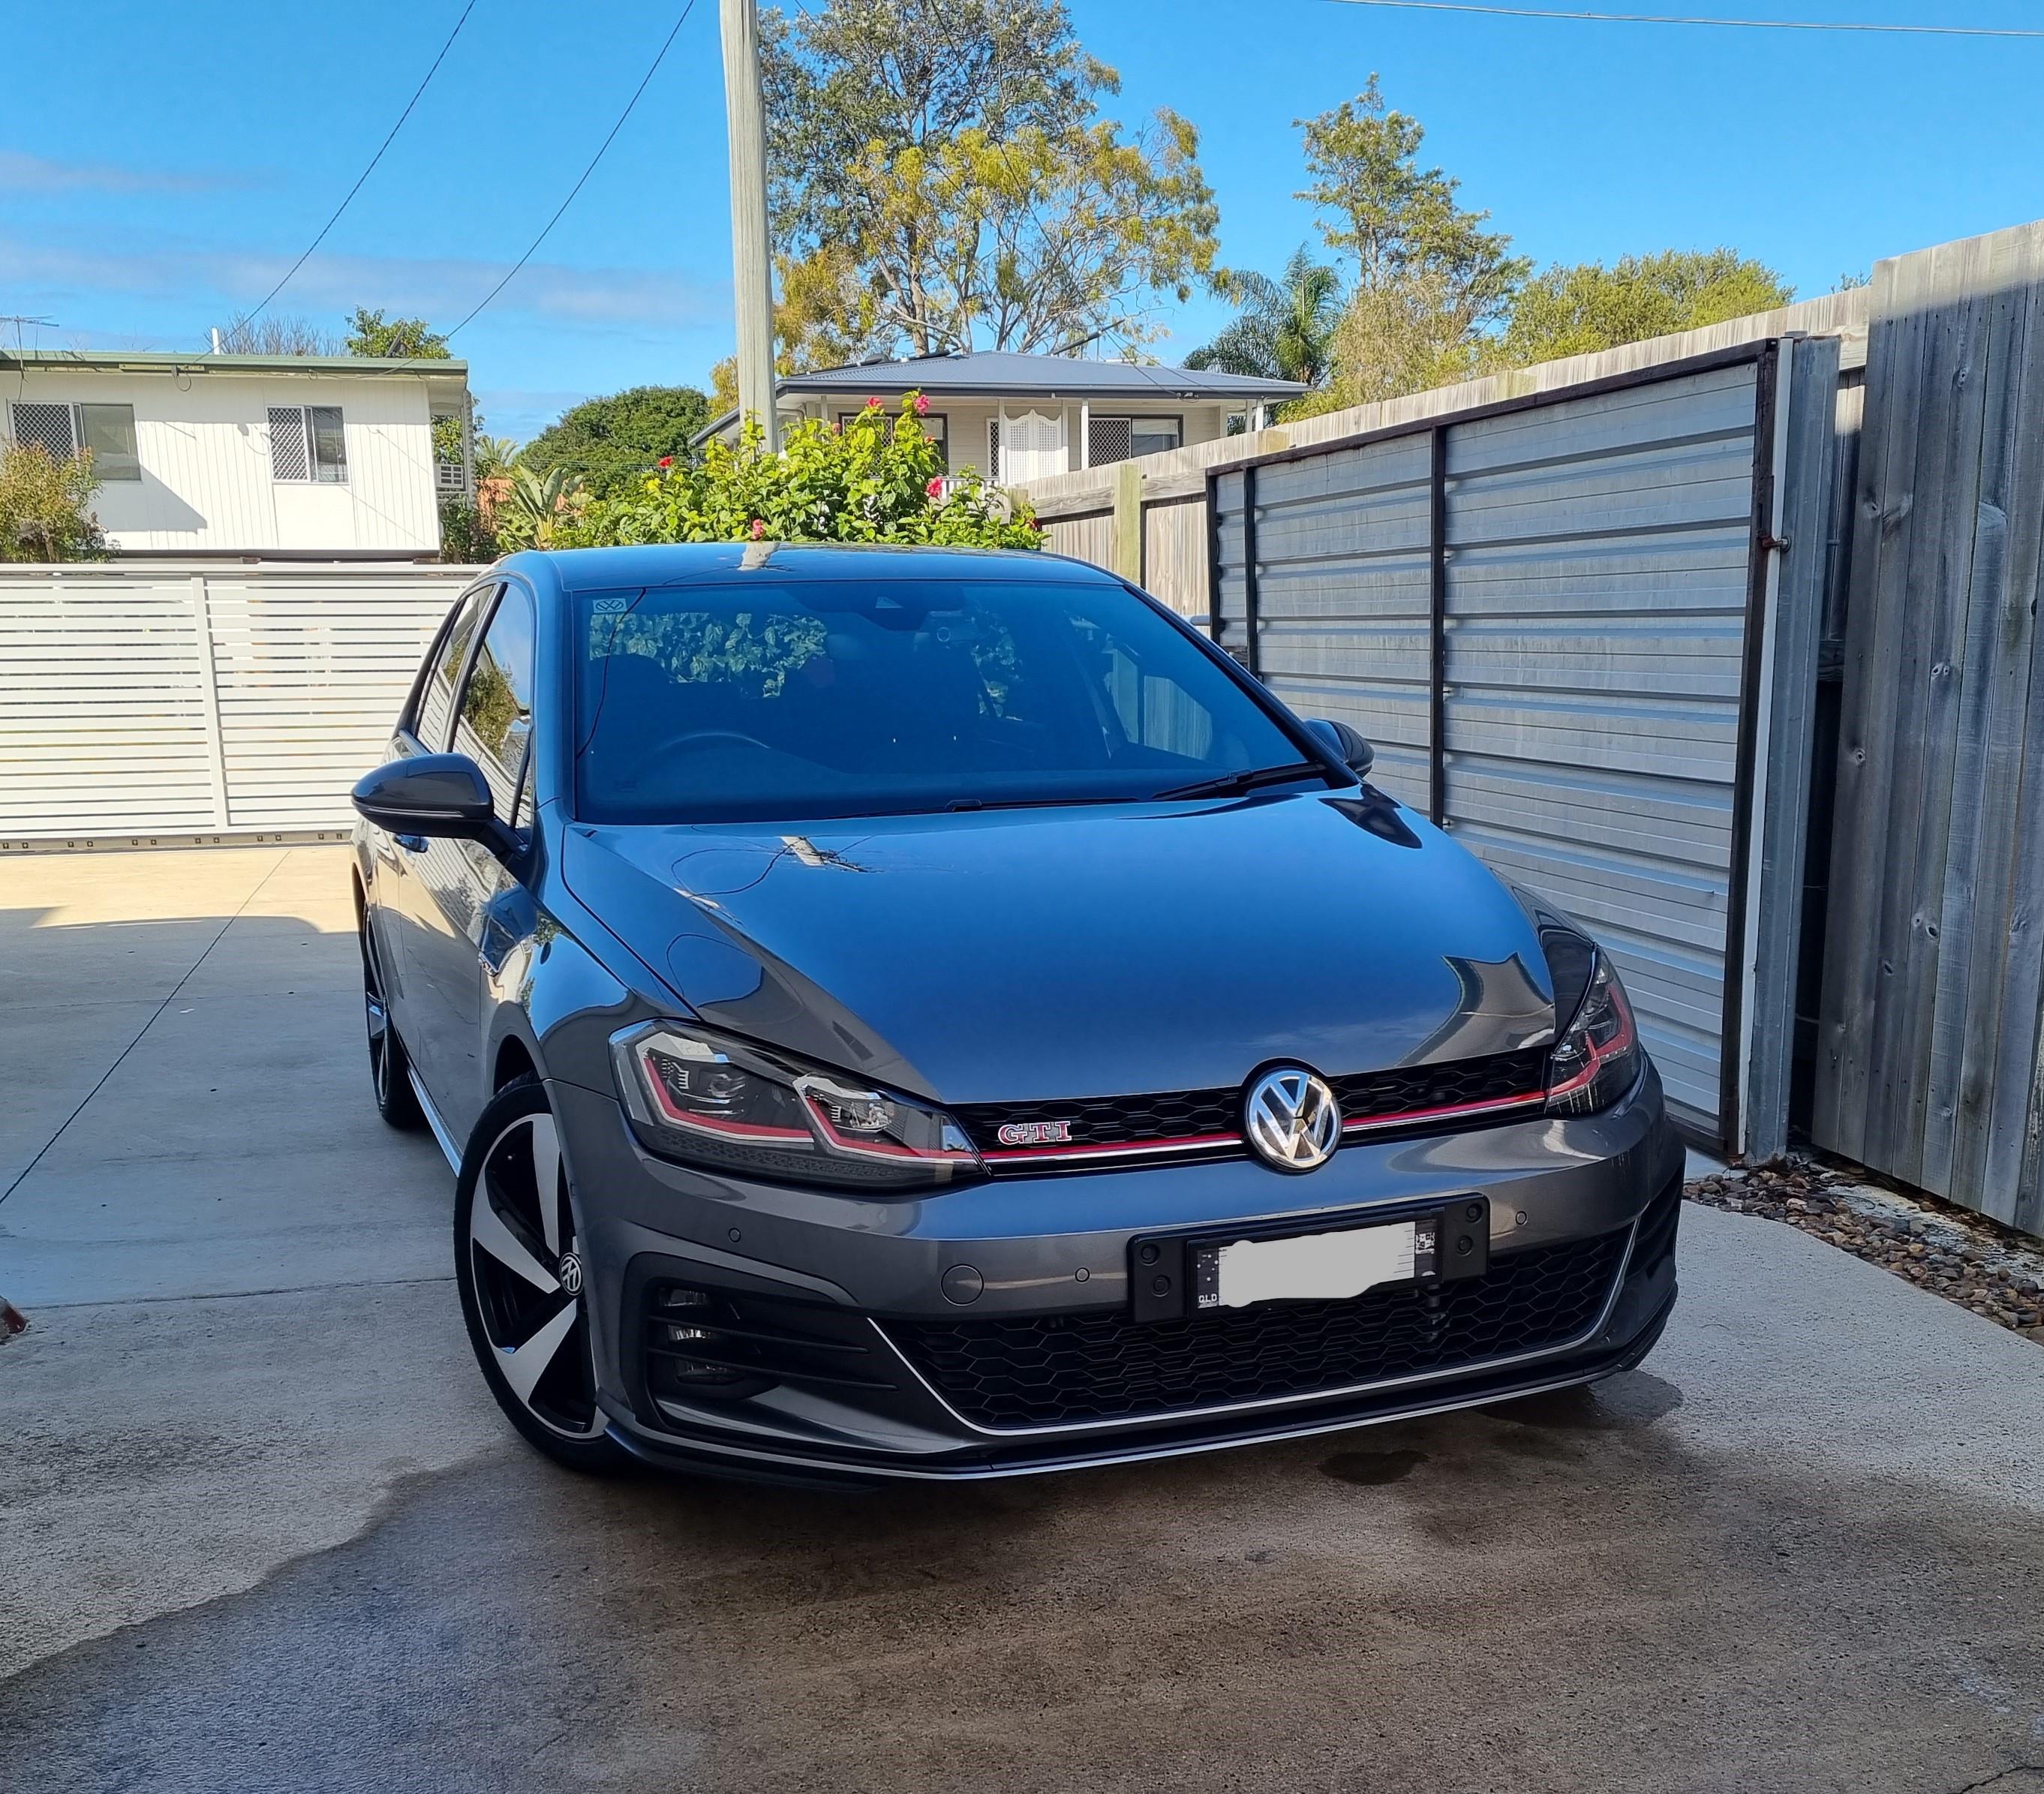 VW Golf 5 GTI Review + Costs, Servicing & Reliability 